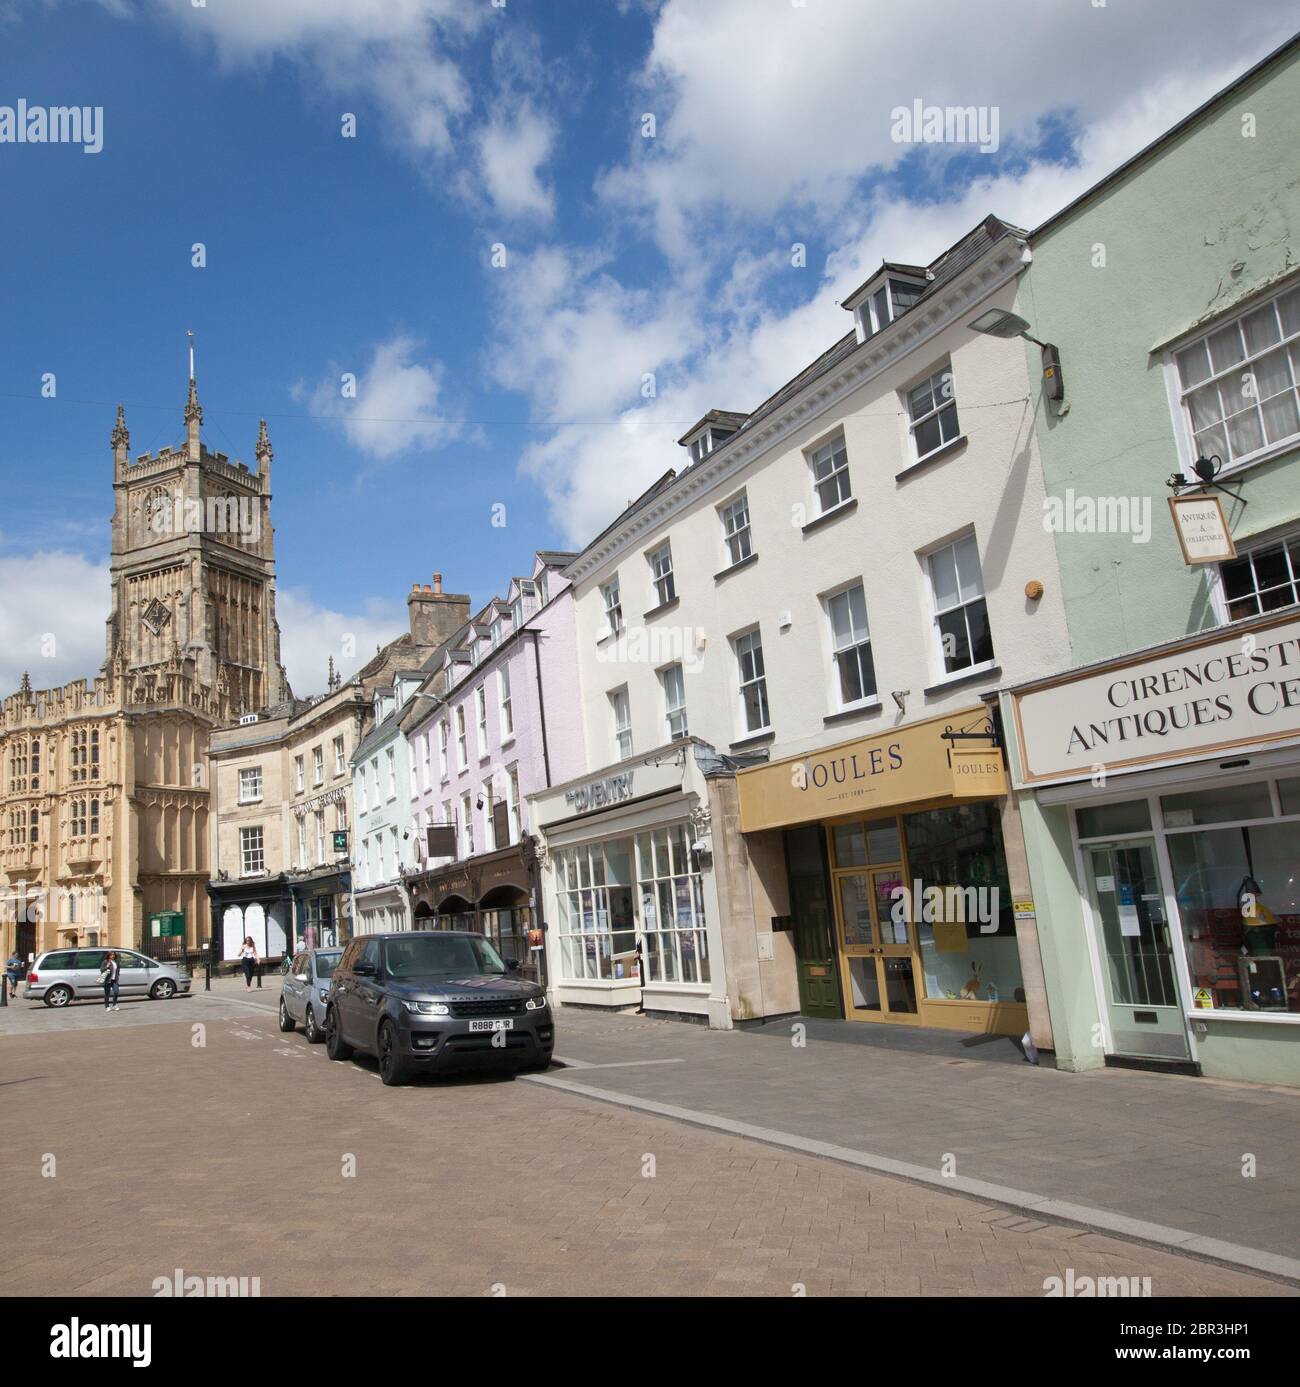 Cirencester town centre in Gloucestershire, UK Stock Photo